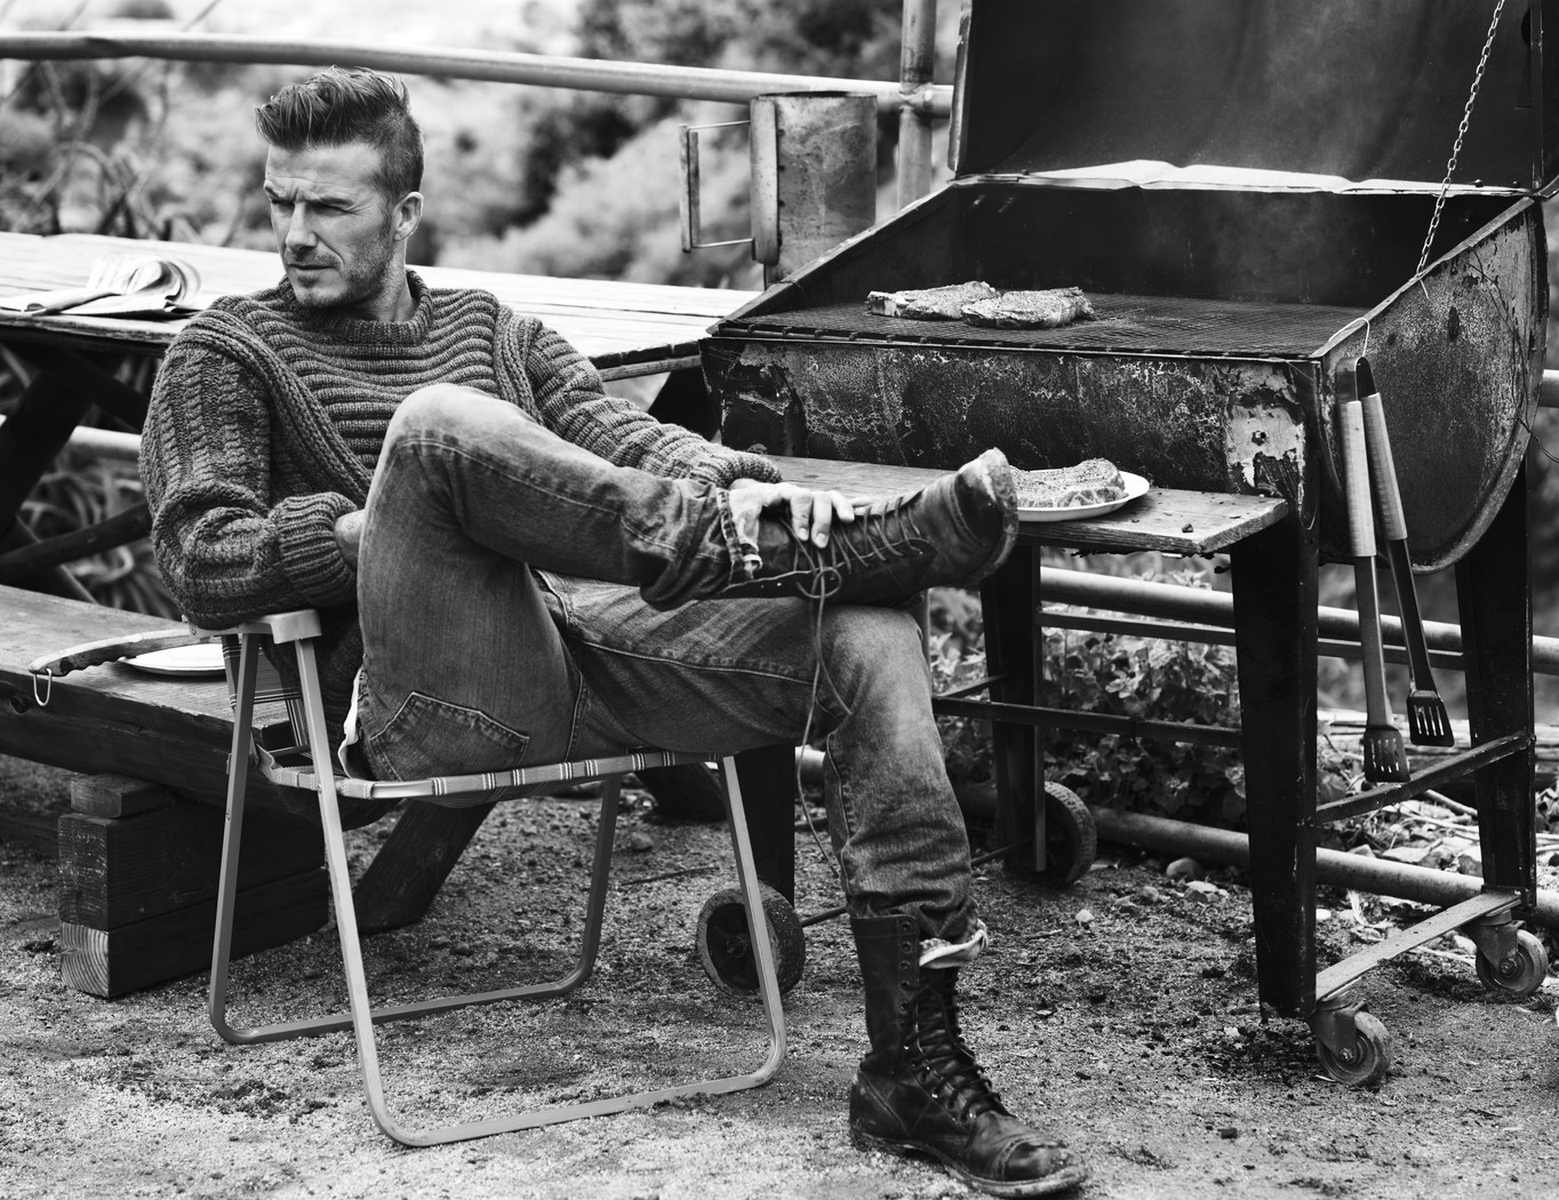 People 1559x1200 David Beckham footballers model men jeans looking into the distance monochrome celebrity